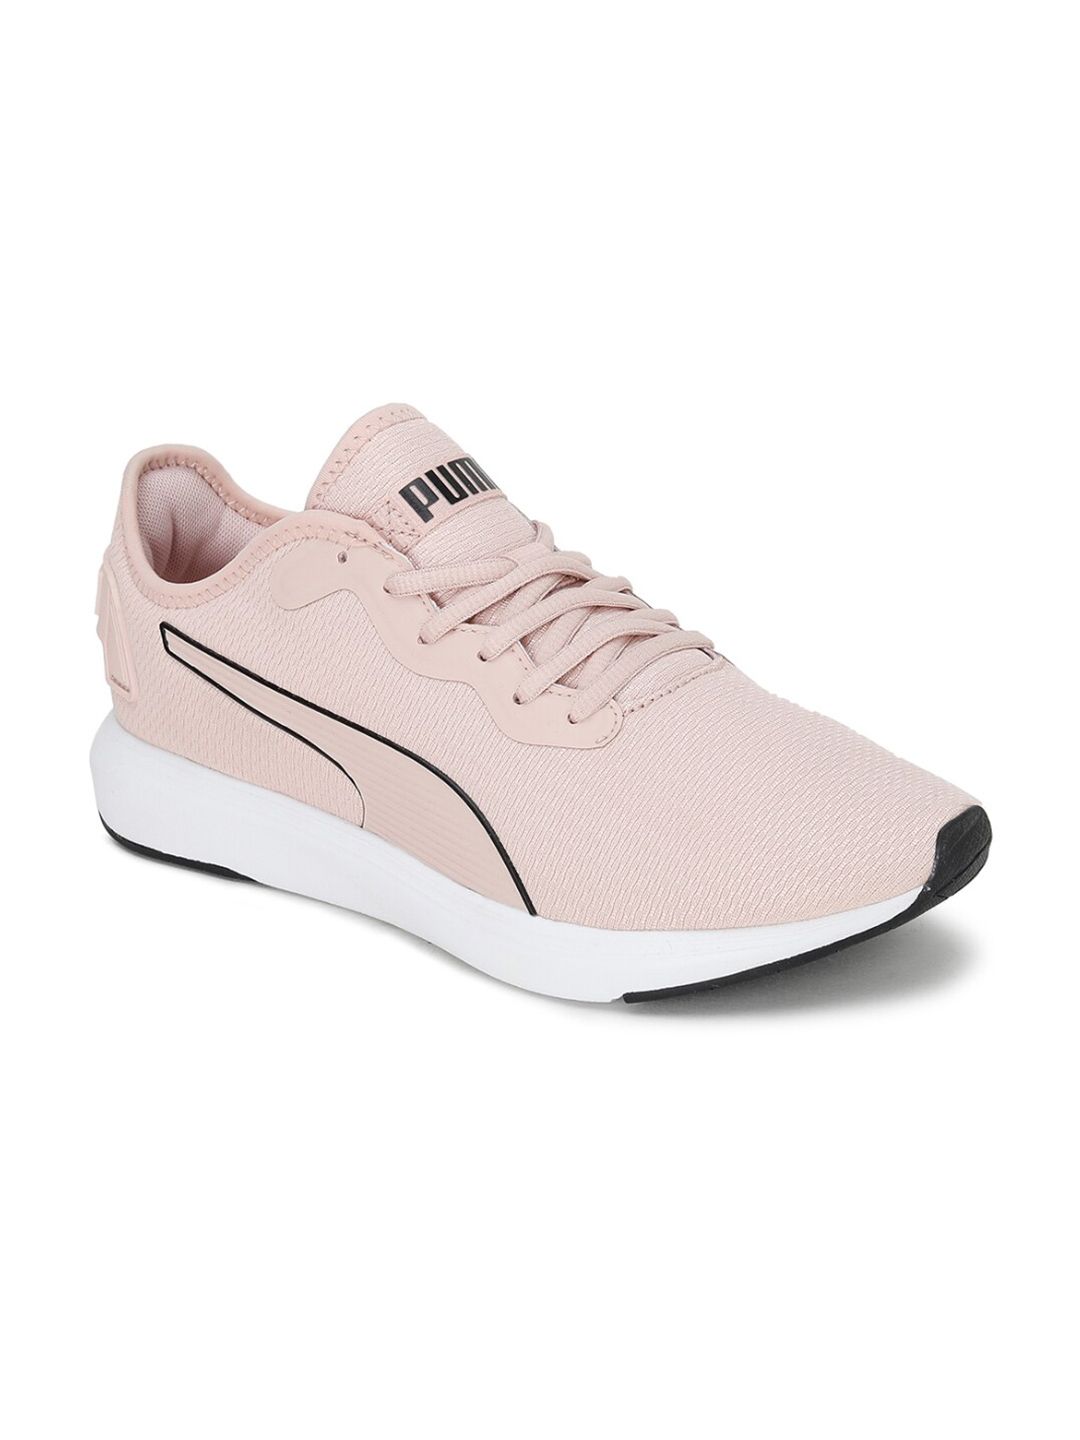 Puma Unisex Pink Sports Shoes Price in India